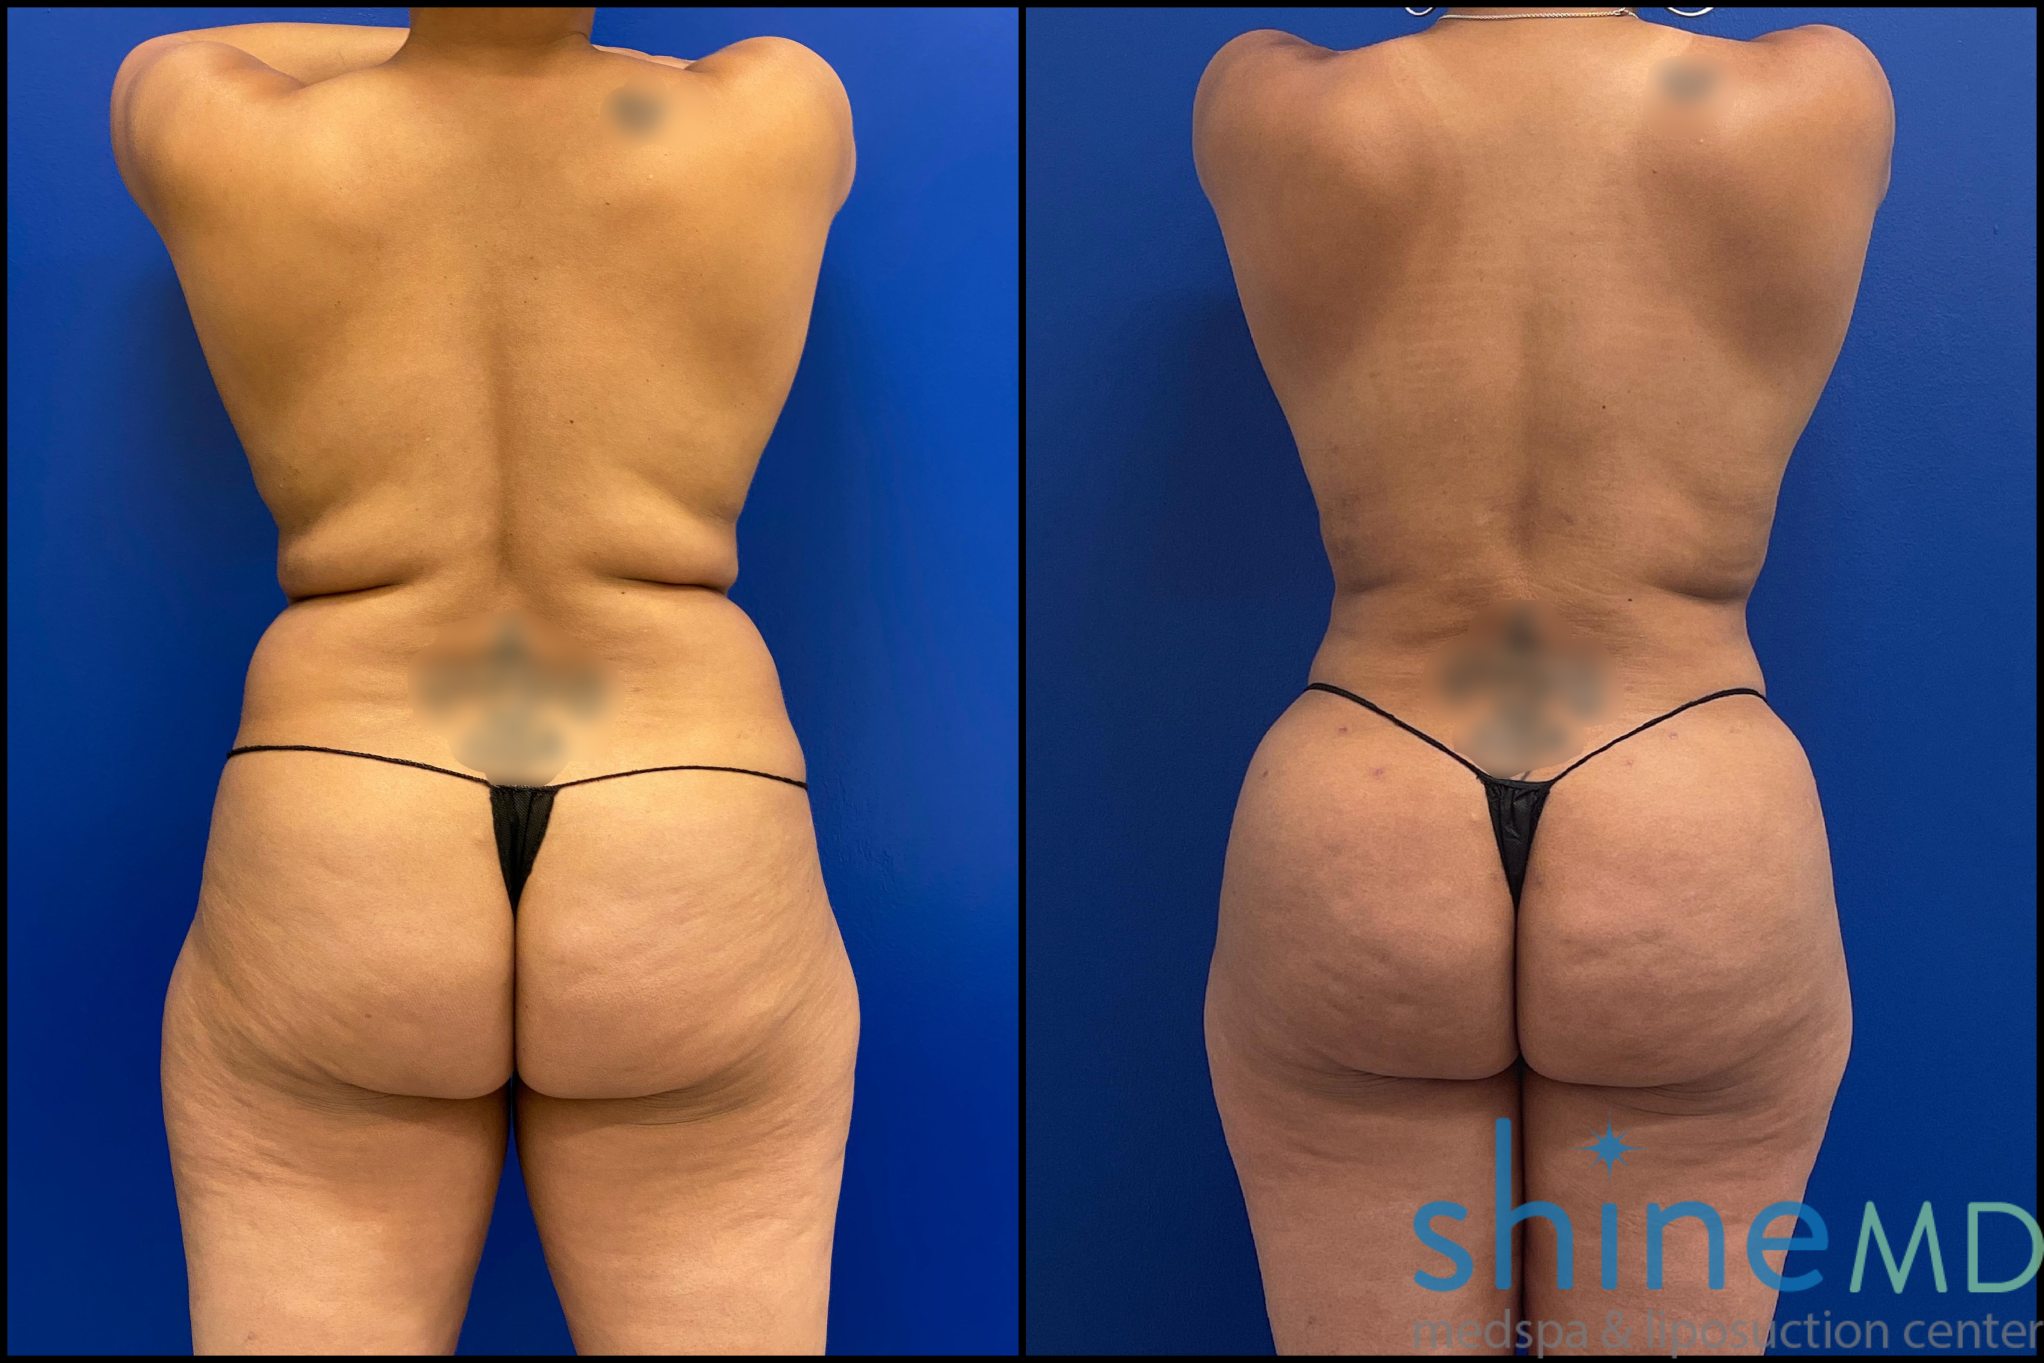 liposuction surgery before and after photos